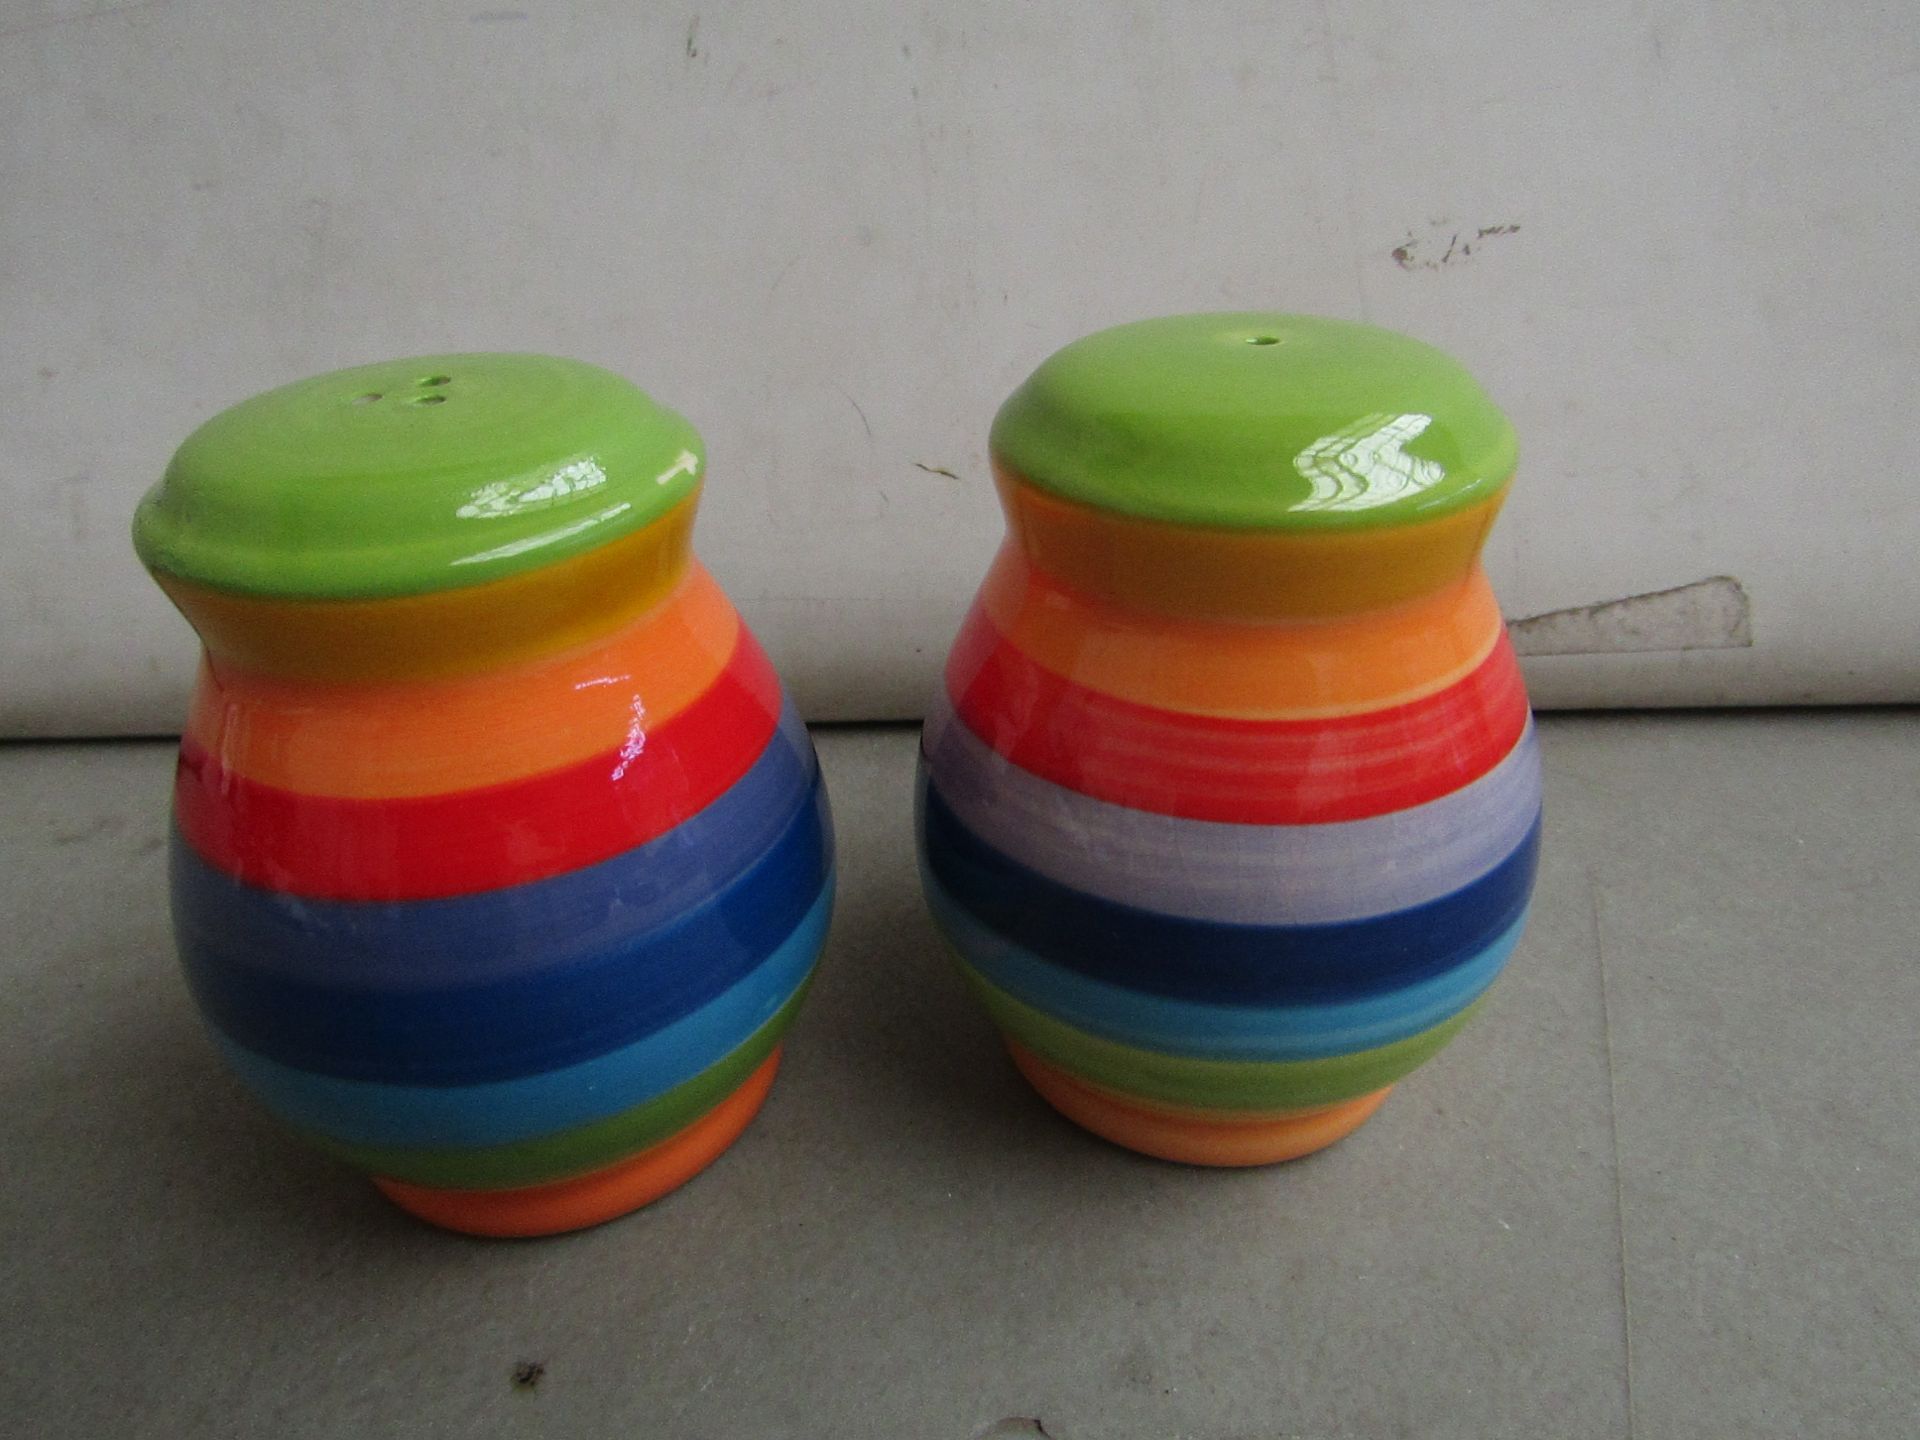 4x Sets of 2 salt and pepper shakers, new.